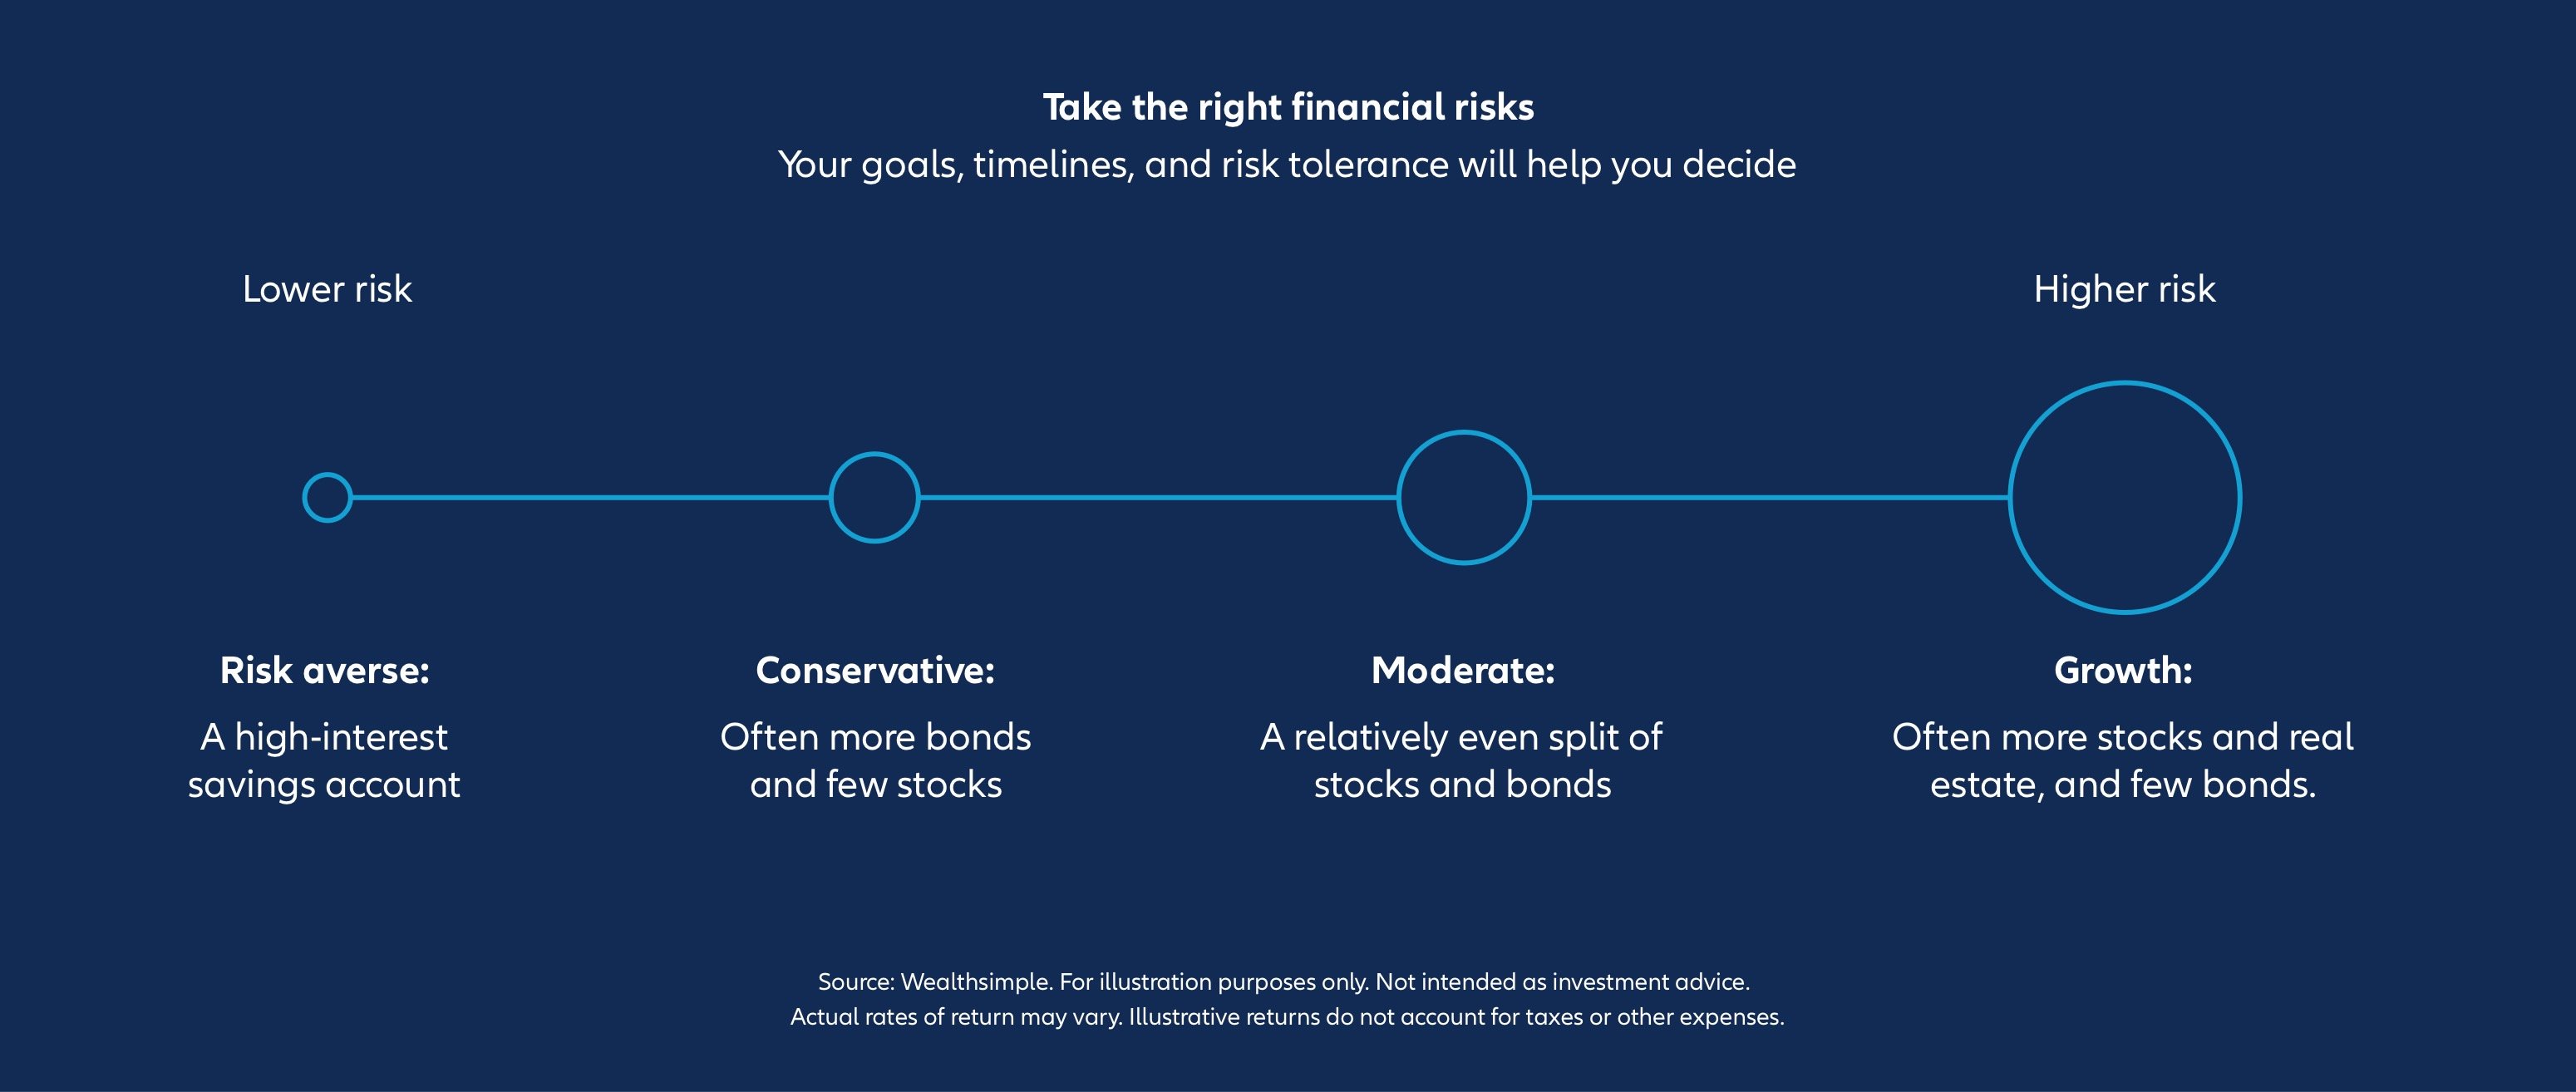 Infographic: Take the right financial risks - your goals, timing, and risk tolerance will help you decide.  Four circles can be seen from left to right: While the investment risk increases from left to right, higher profits can be expected analogously. From risk-averse: a high-yield savings account to highest growth: often more shares and real estate, and few bonds.